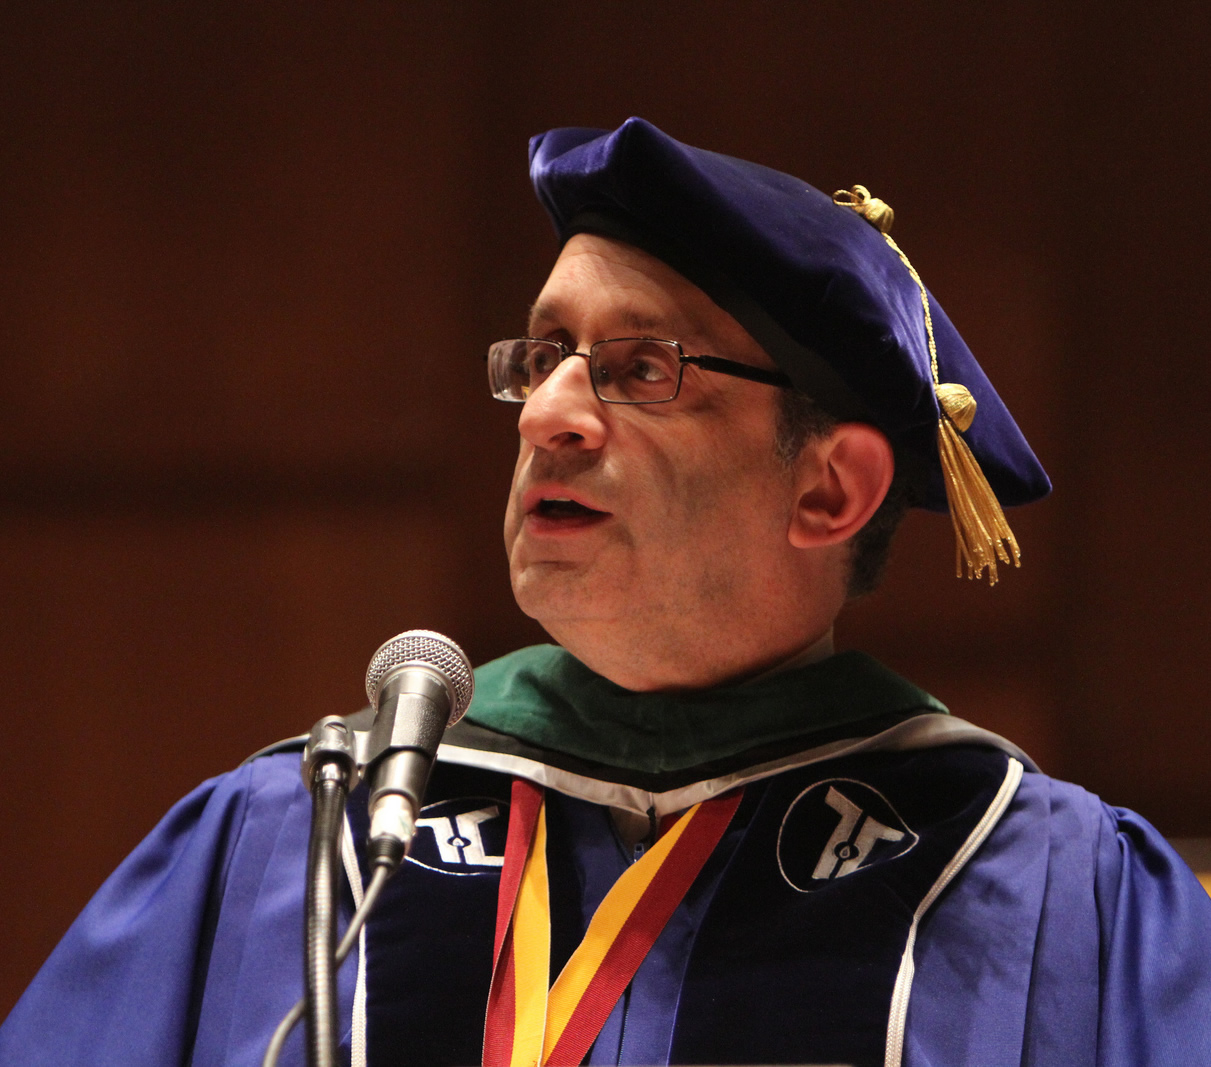 Dr. Kadish speaking at Touro College Commencement, May 26, 2013